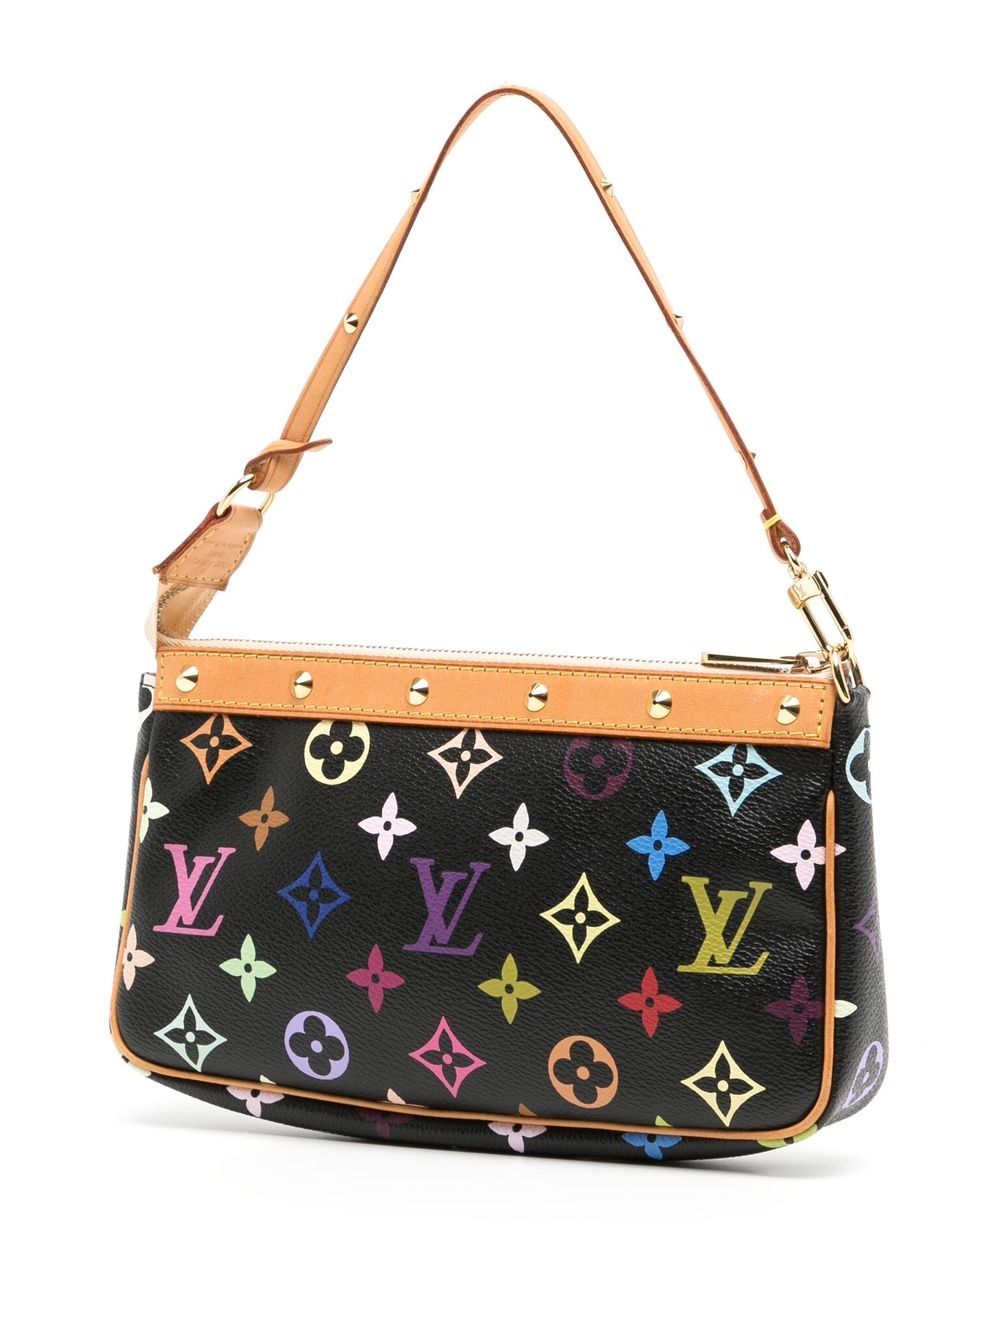 Louis Vuitton 2007 Pre-owned Monogram Two-Way Bag